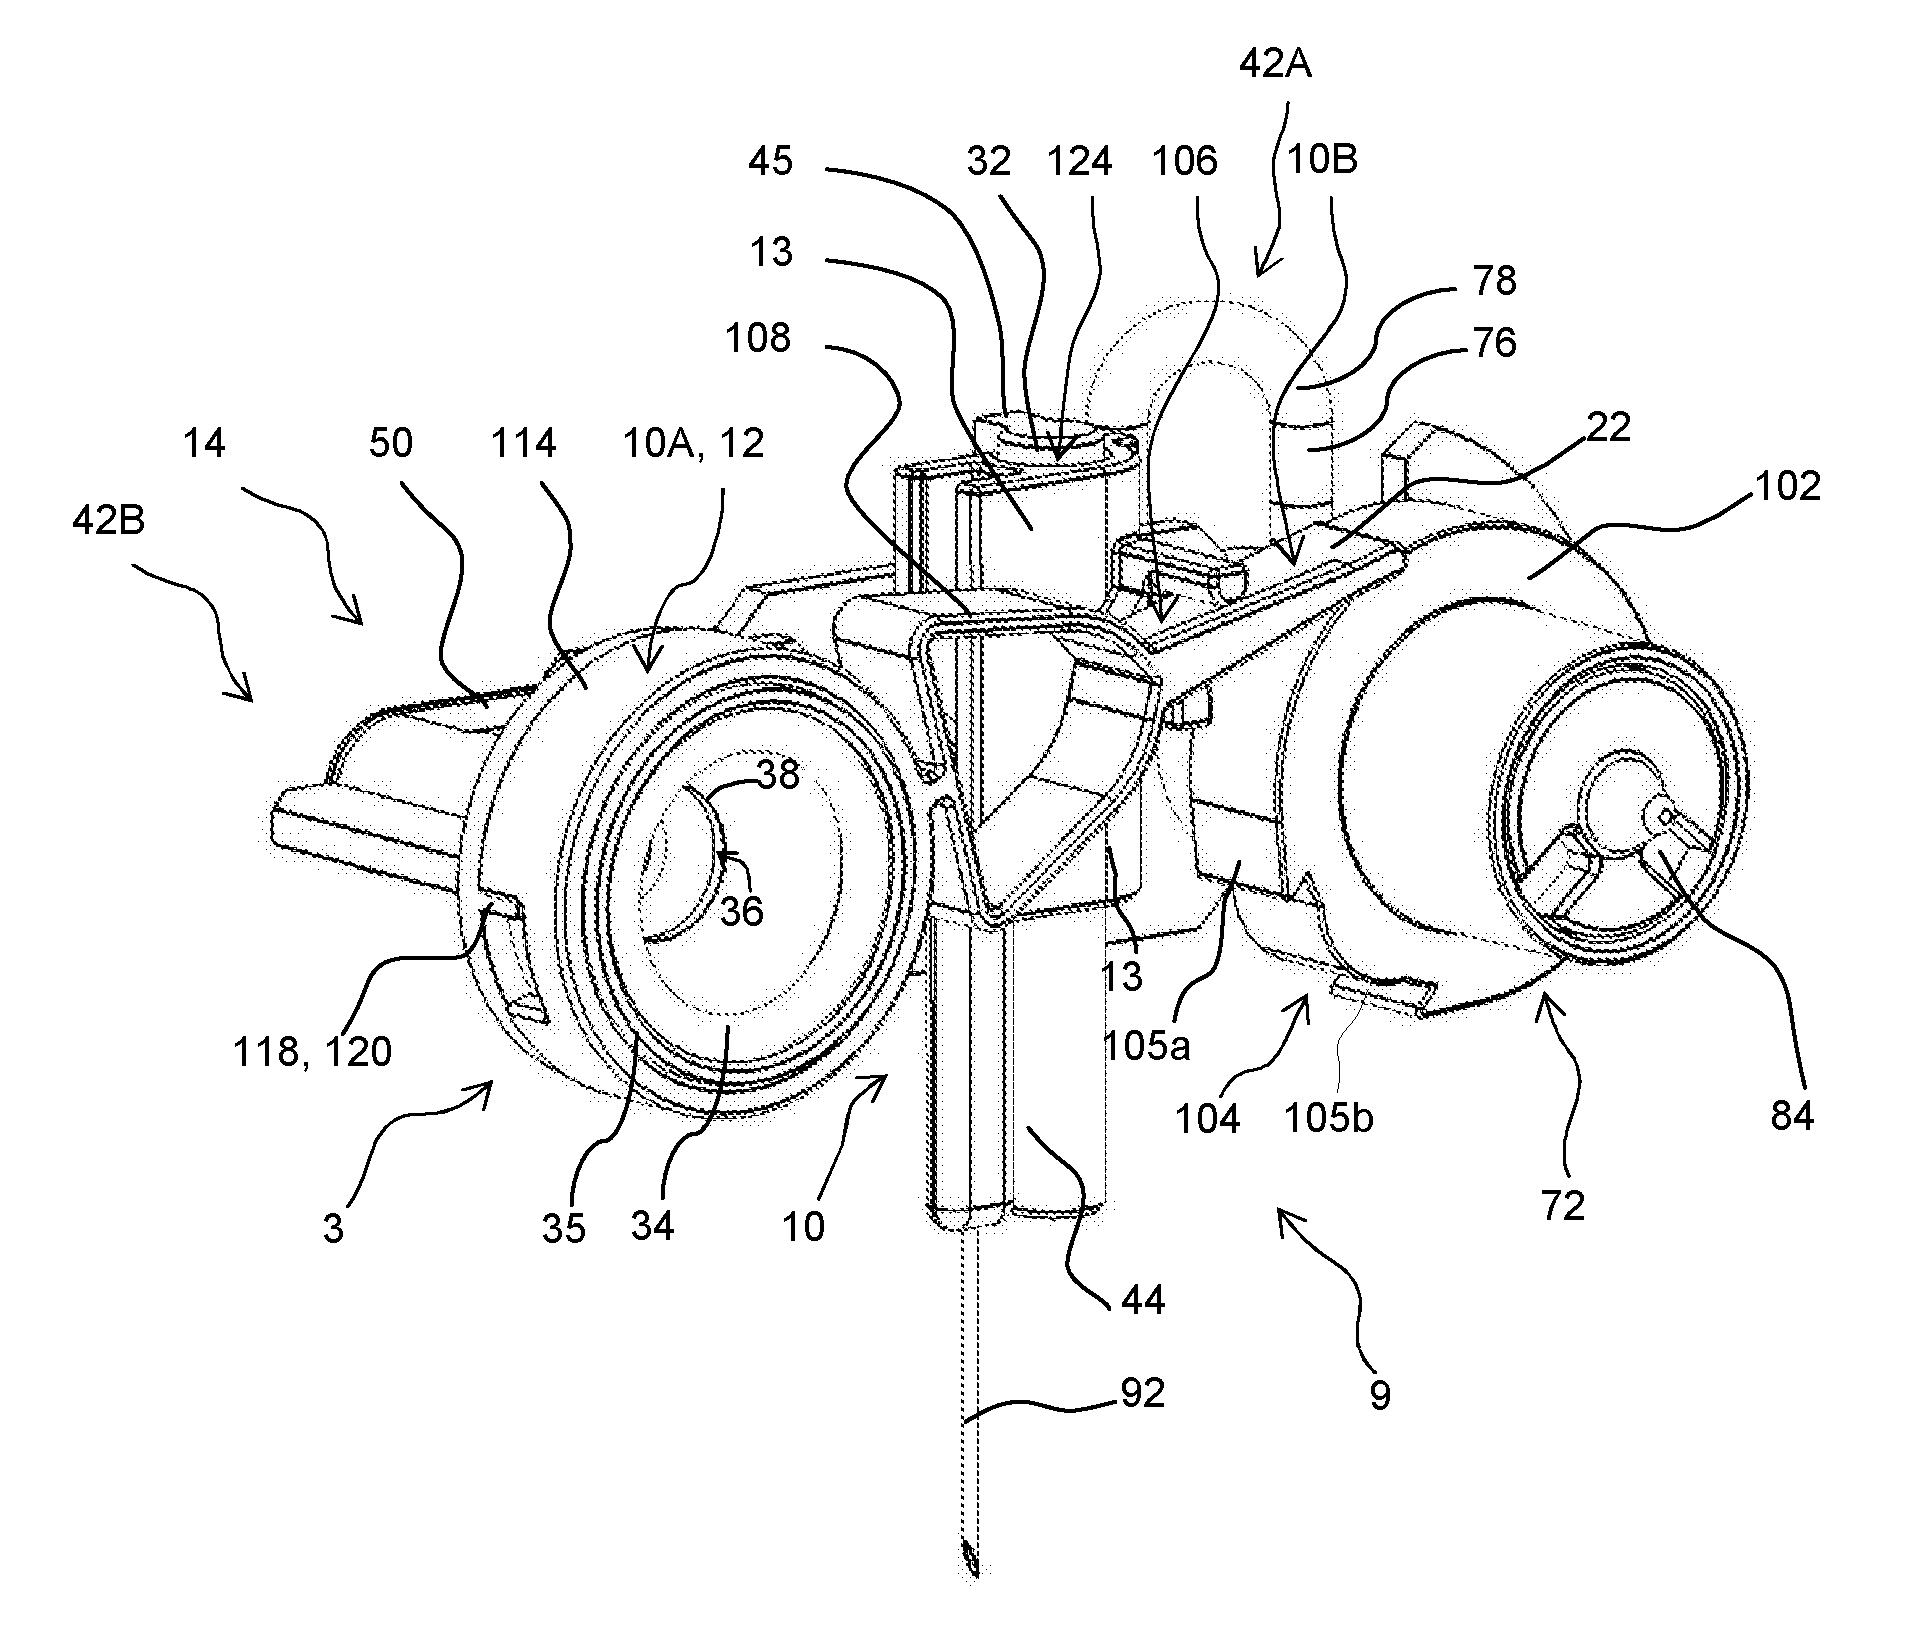 Drug delivery device with needle actuation mechanism